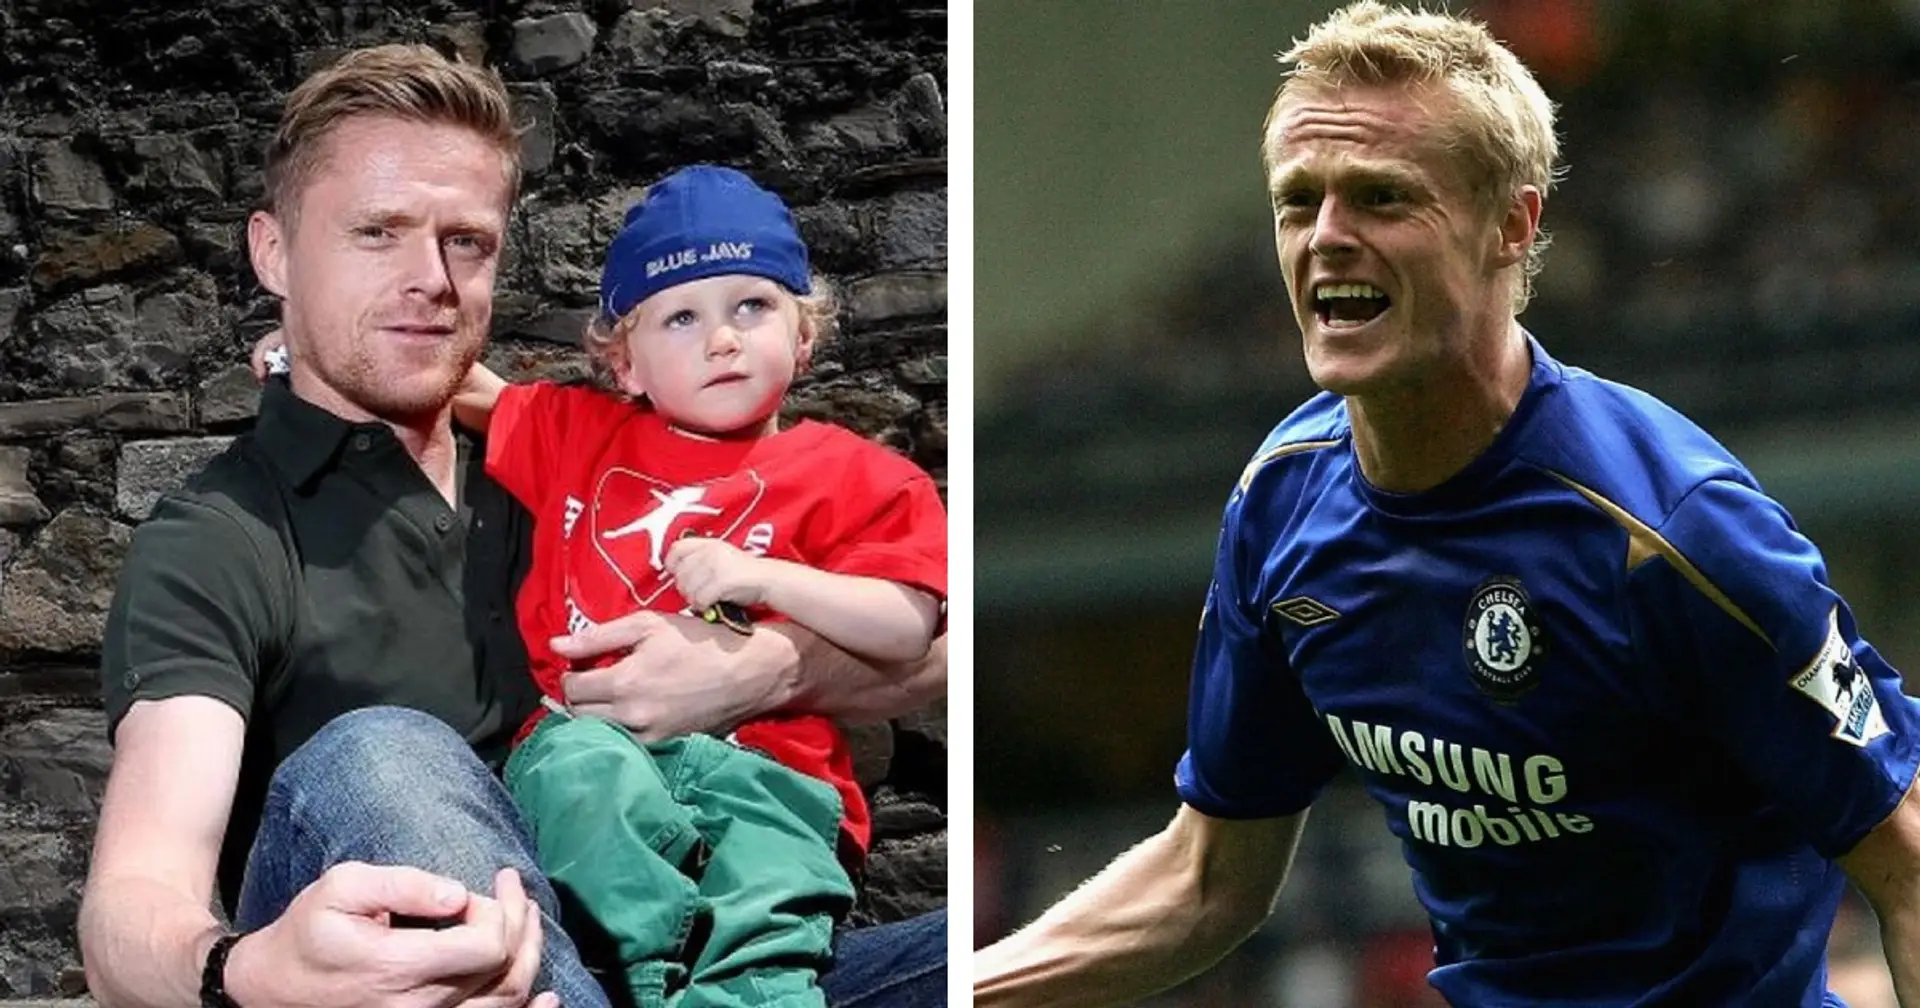 Damien Duff once donated 18-month wages to charities – his son's heart surgery inspired him